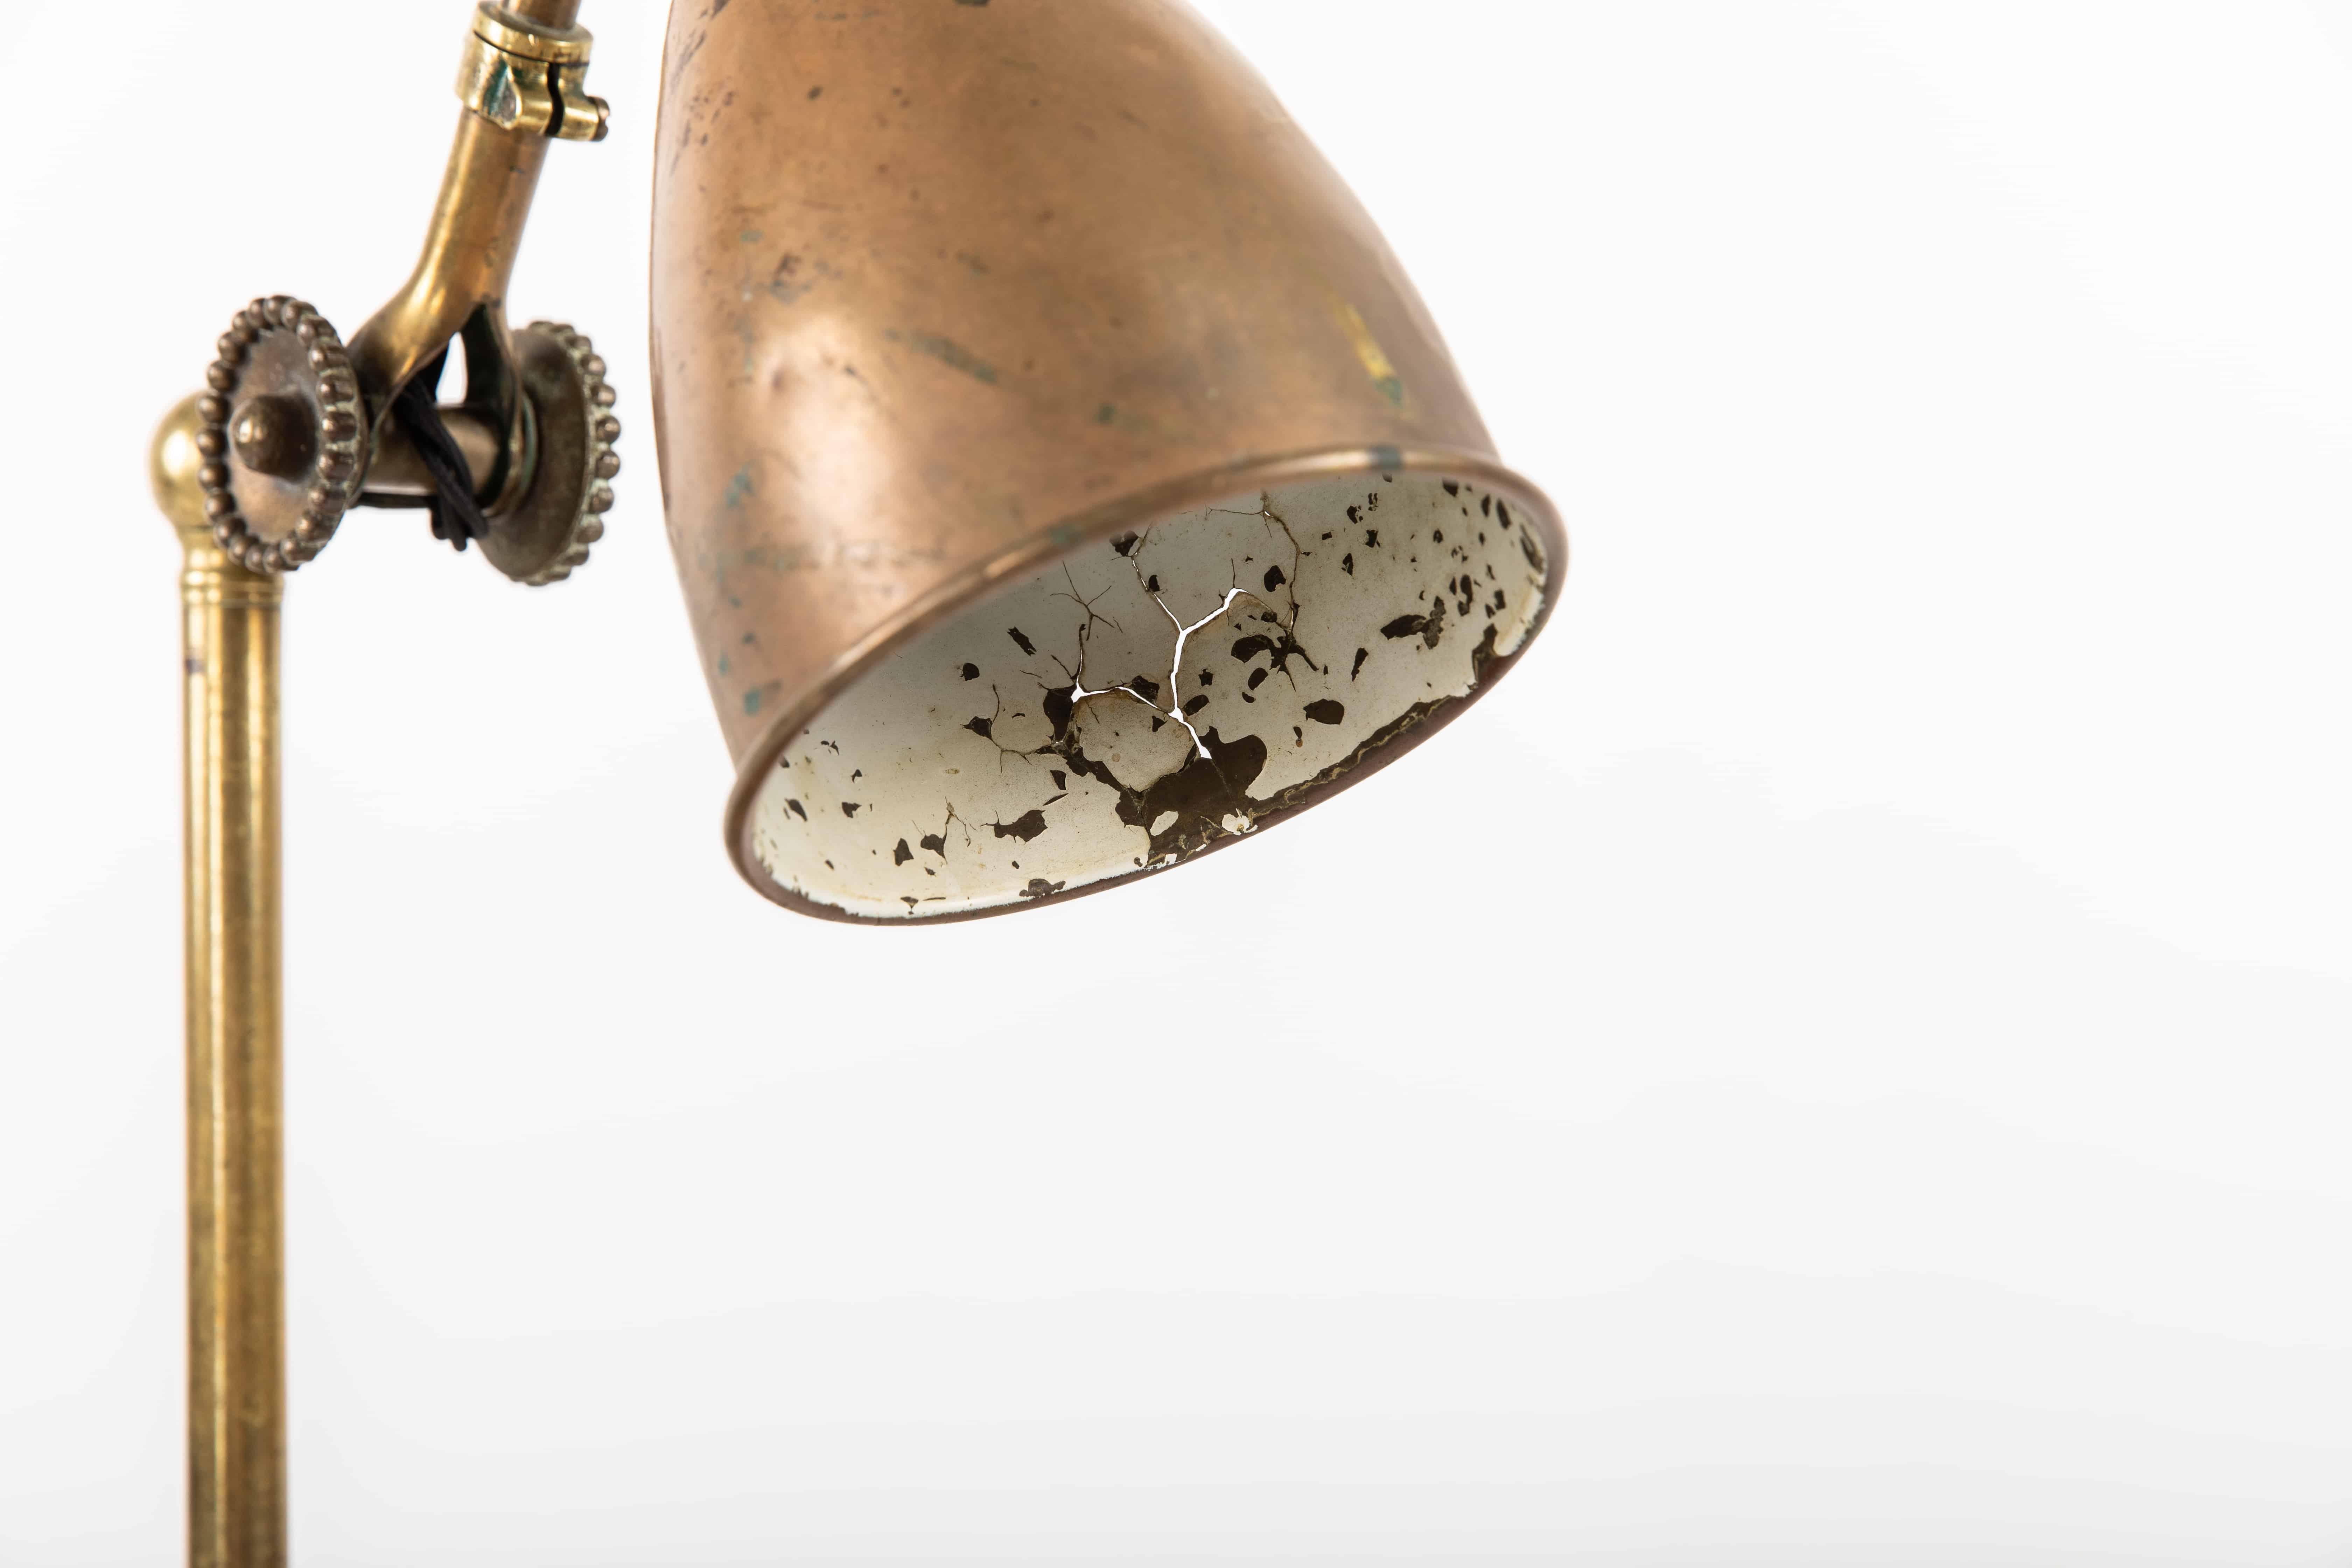 A stunning desk lamp by renowned English lighting company Dugdills. c.1920

This very early example, made entirely of brass, features the earlier 'rosettes' or daisy wheels for adjusting and tightening the joints into position and unusual heavy